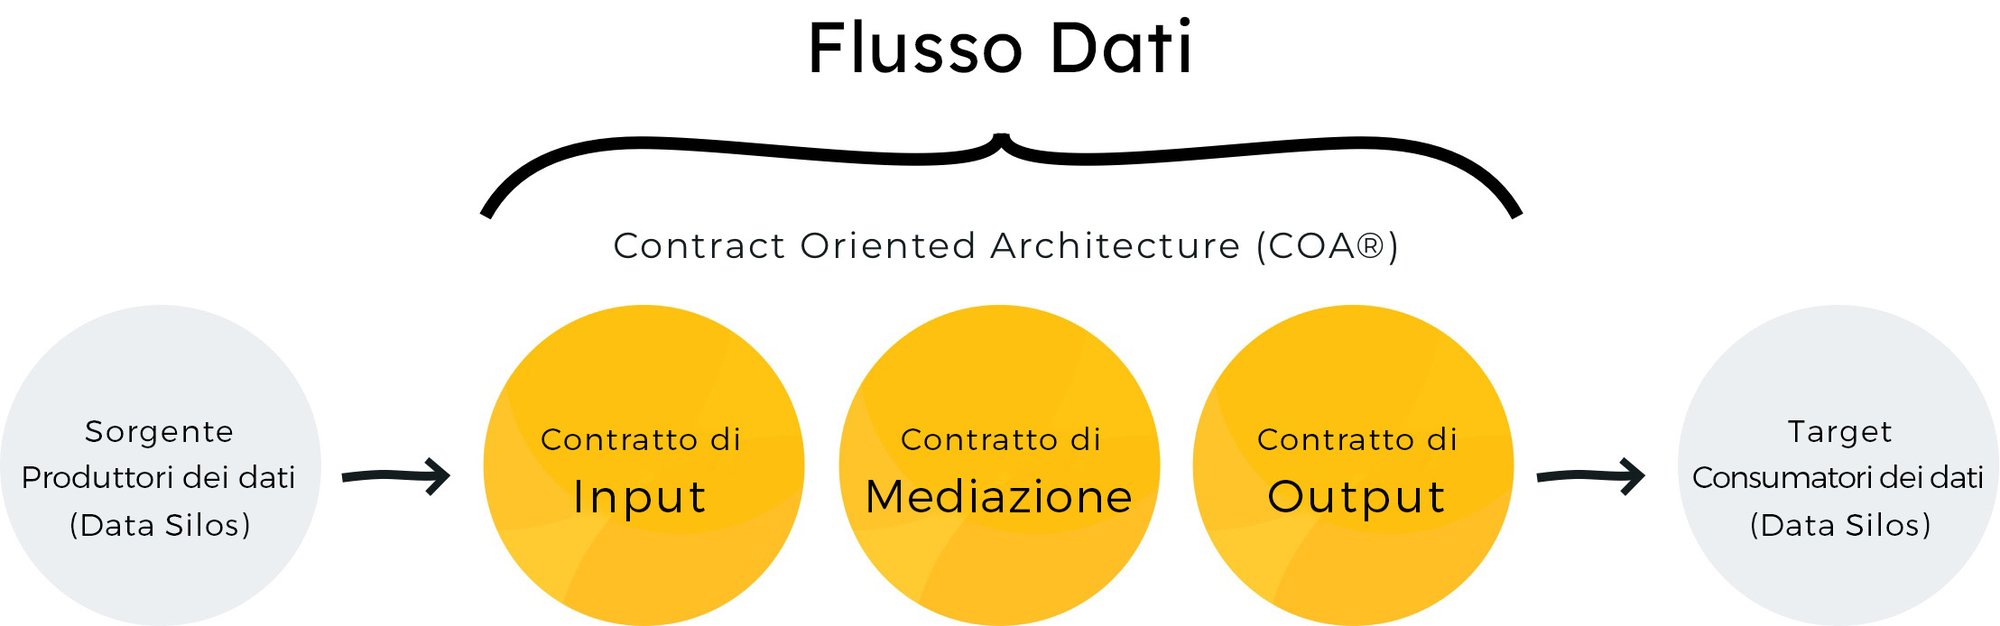 Contract Oriented Architecture